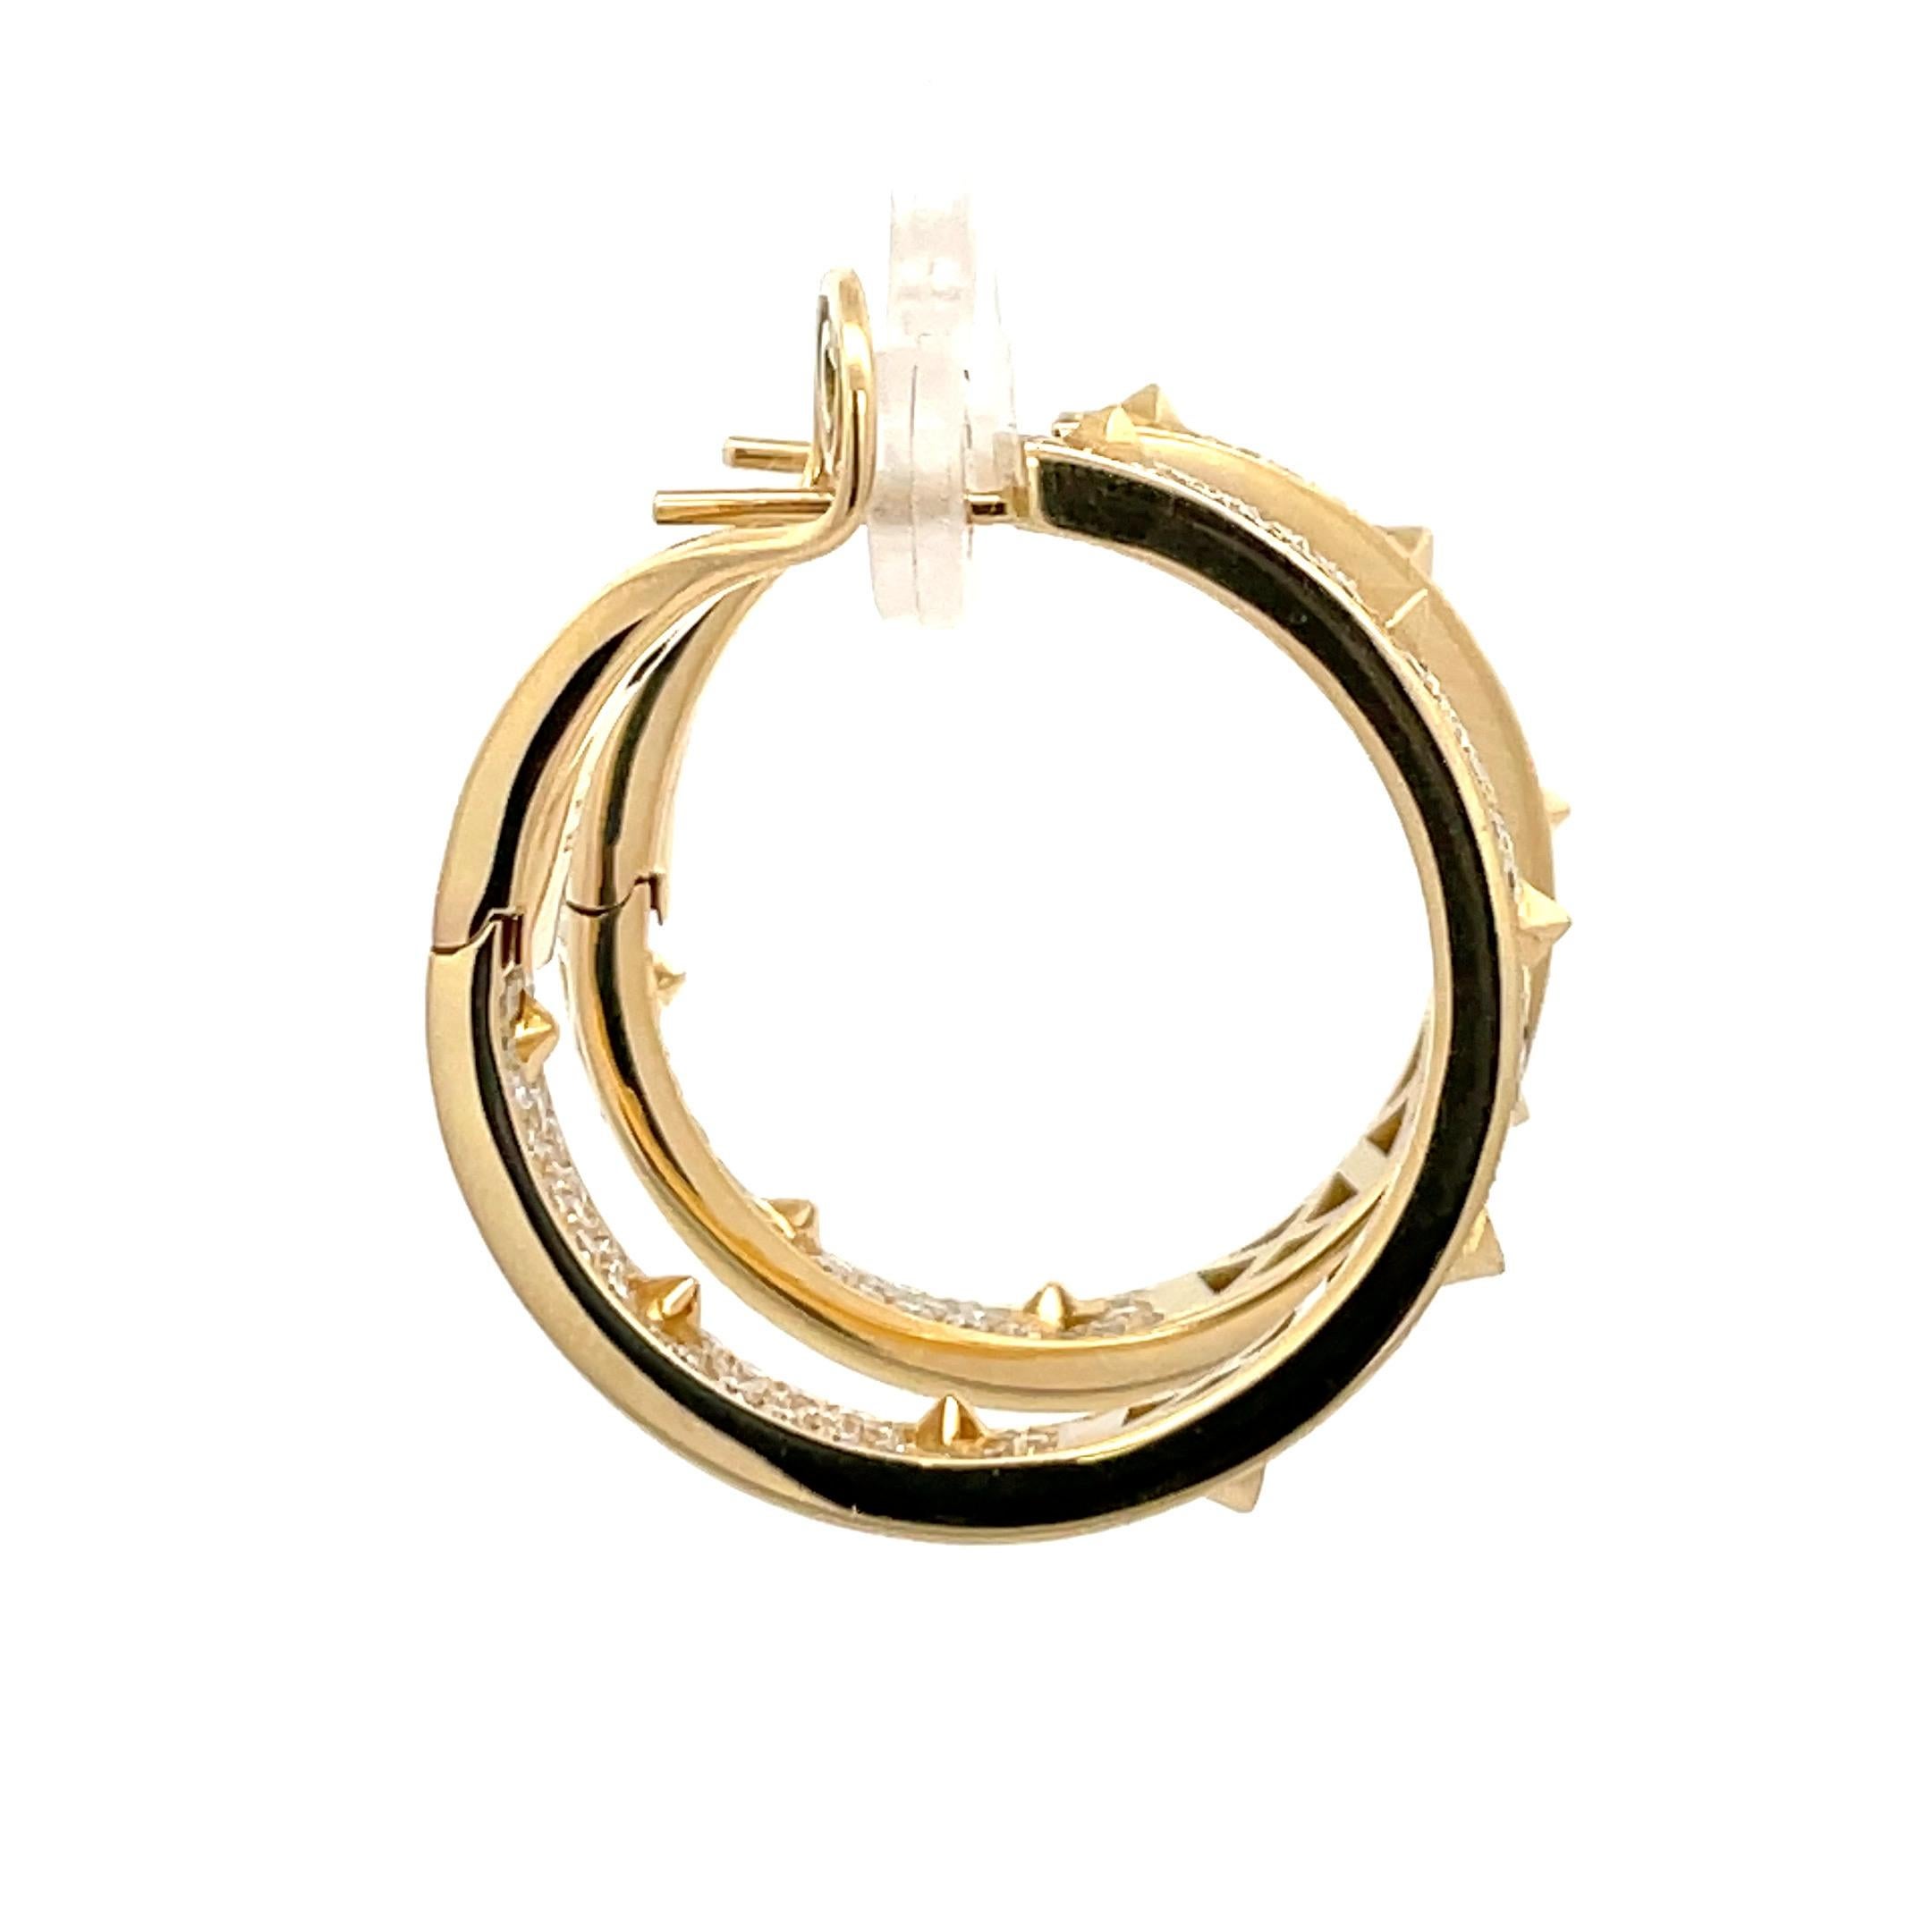 Italian spiked hoop earrings featuring numerous diamond brilliants weighing 2.60 carats, 18 Karat yellow gold.
Color F
Clarity VS
Designer: Crivelli Jewelry 